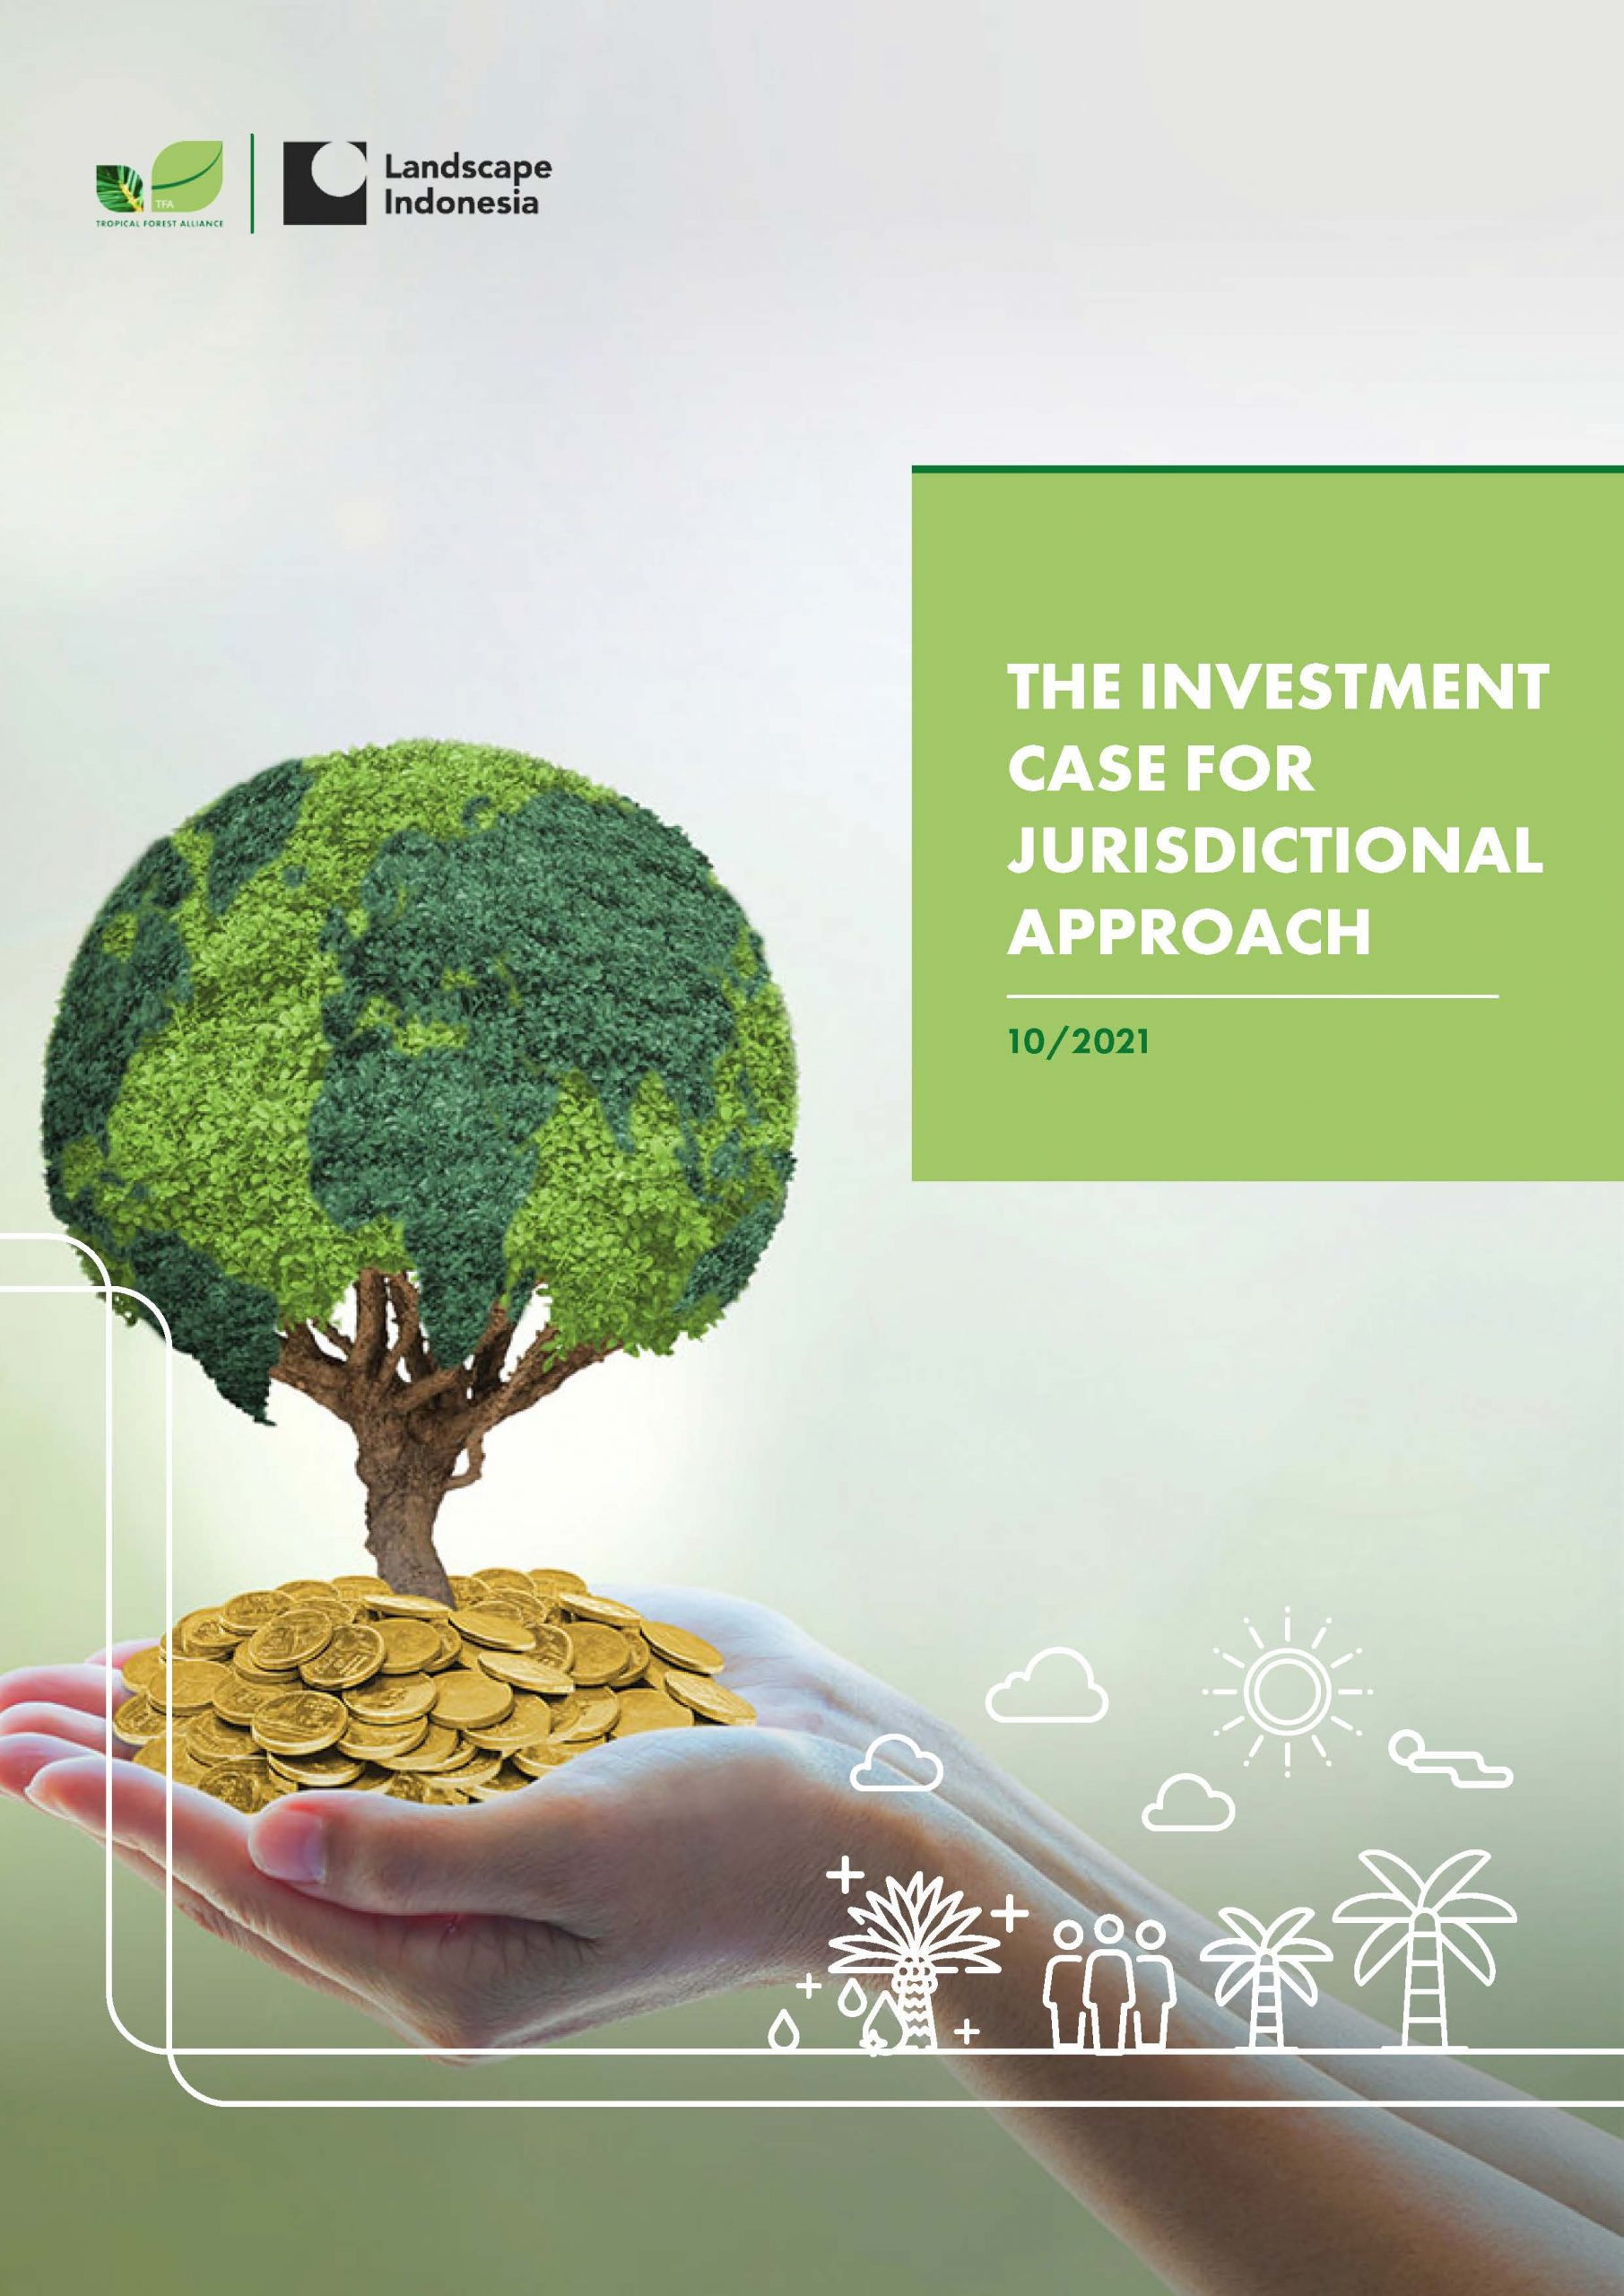 The Investment Case for Jurisdictional Approach